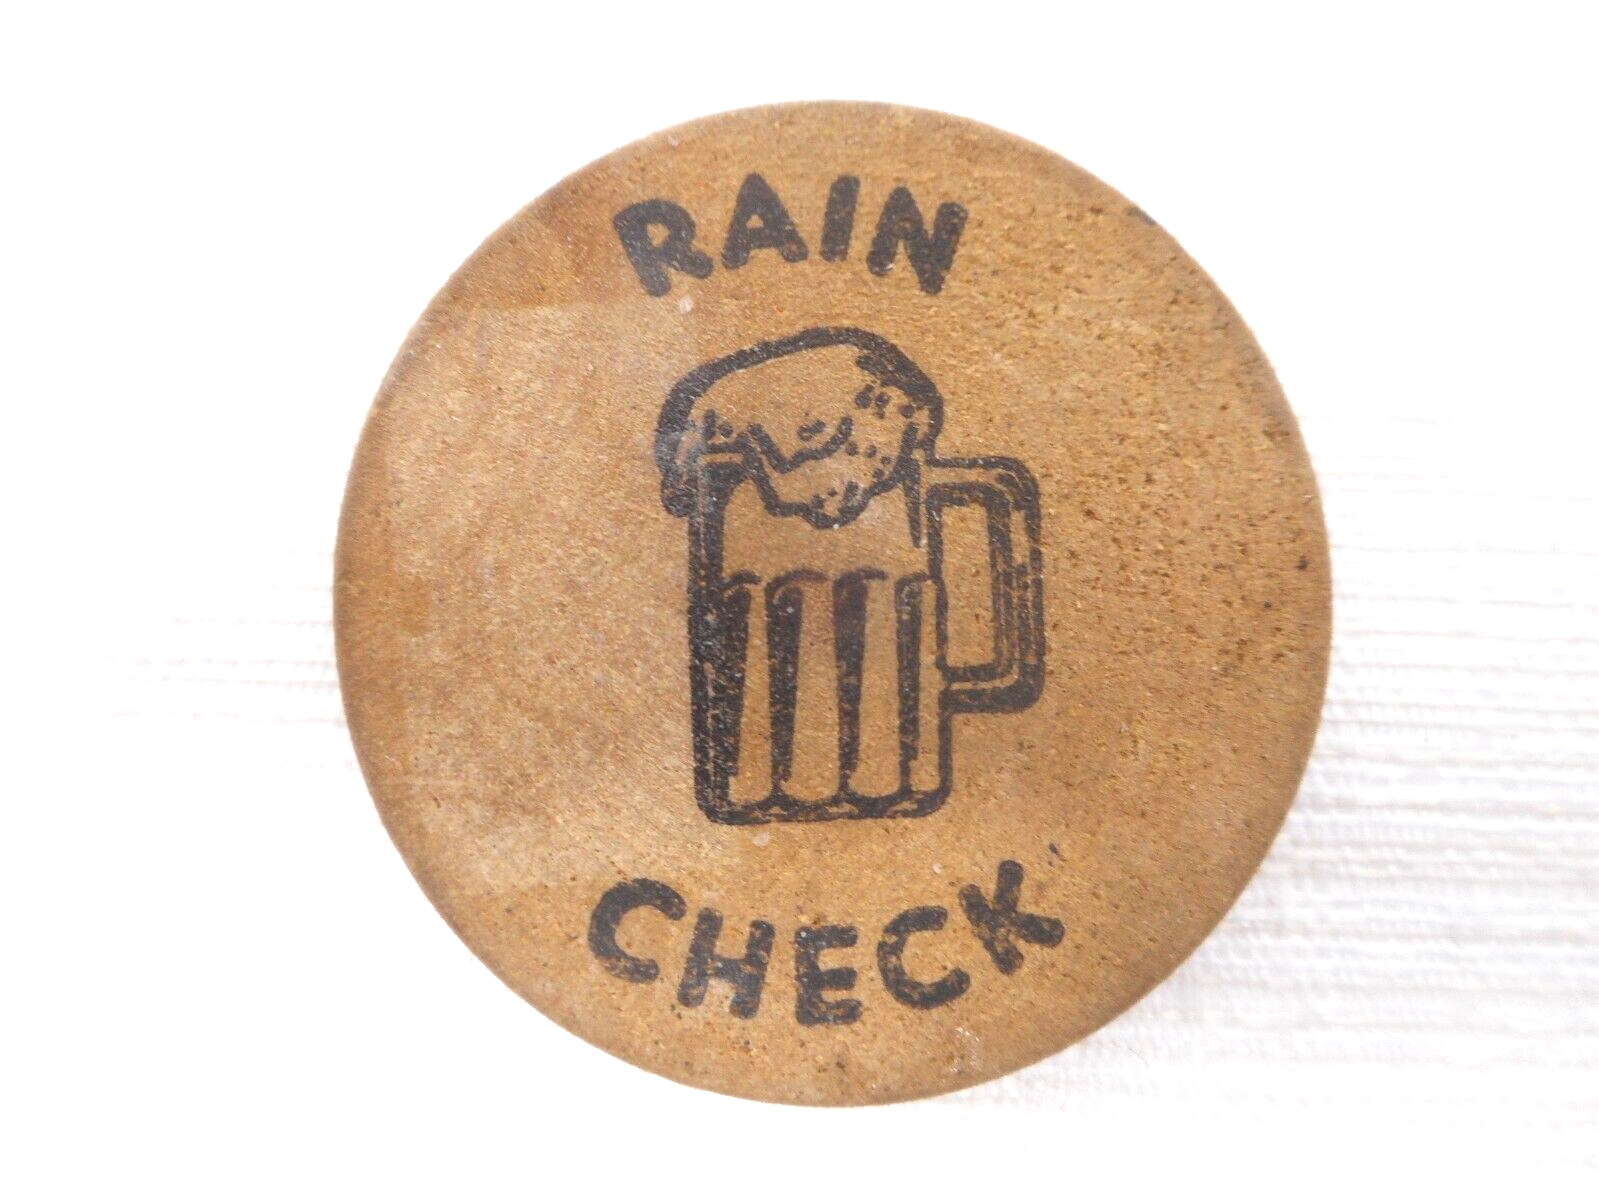 Primary image for Rain Check Wooden Nickel Bar Tavern Credit Token HARD TYME'S Temple, Texas